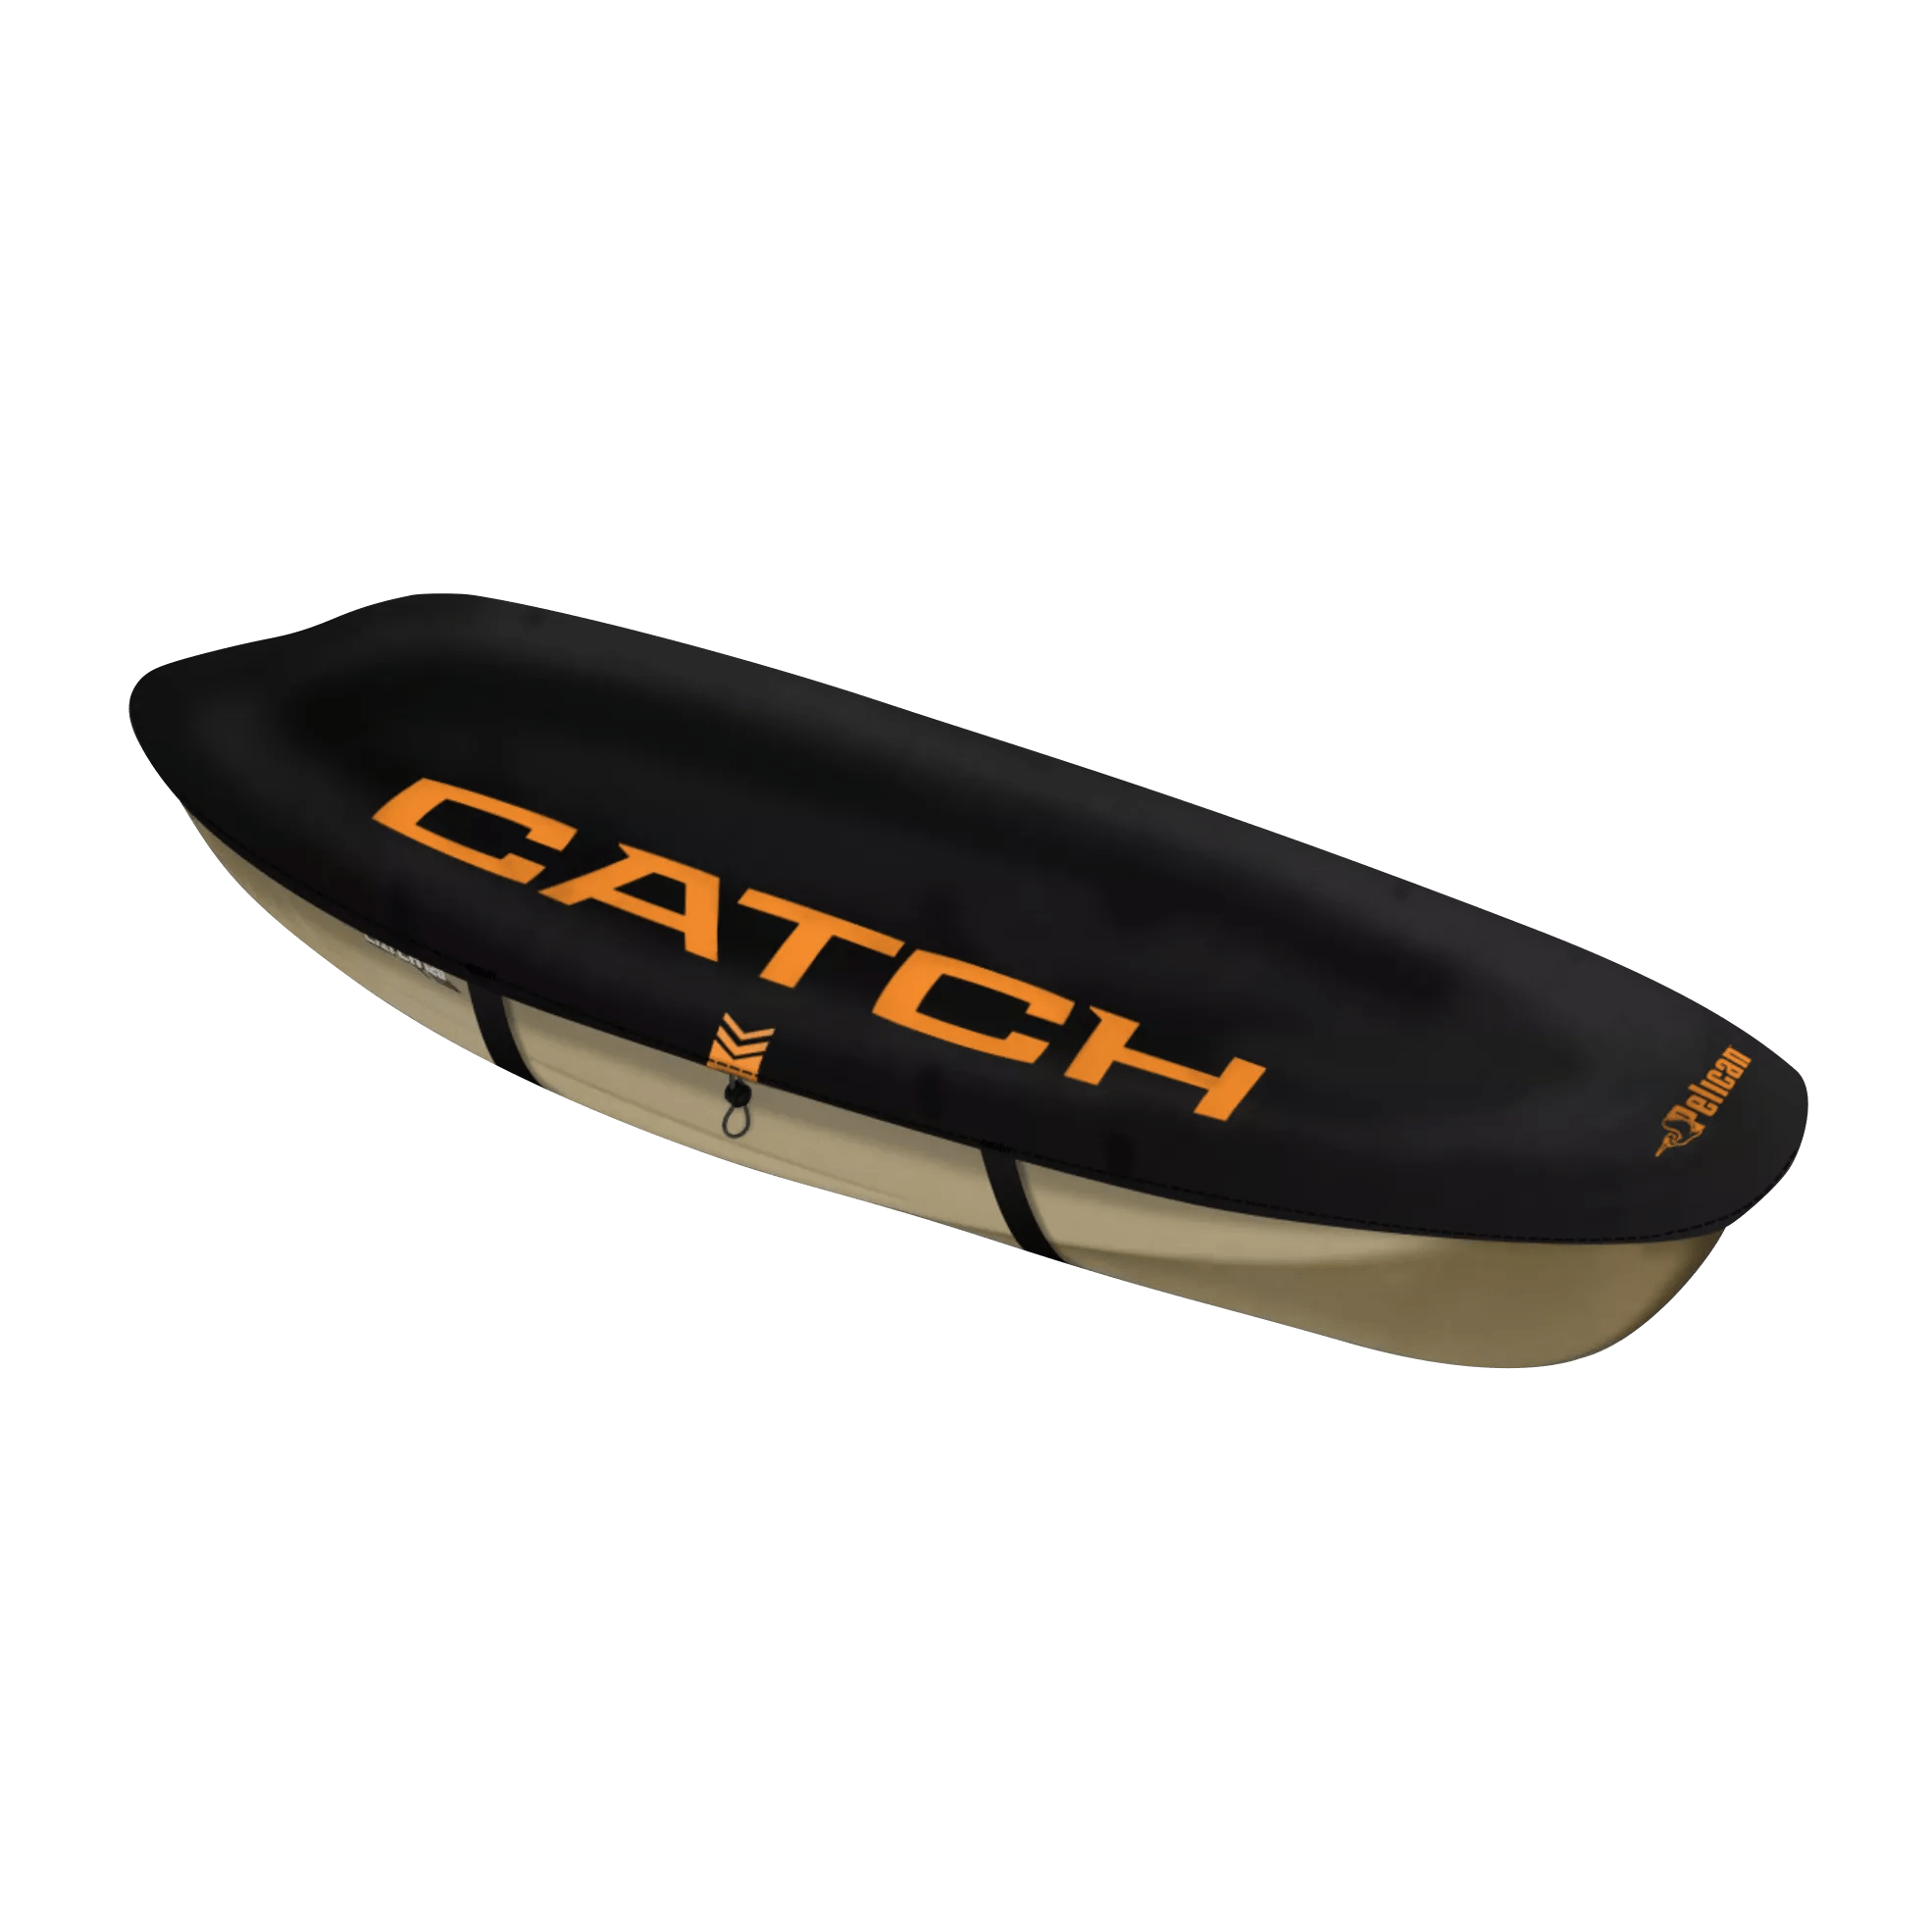 PELICAN - Catch Kayak Cover 304-335 cm (10'-11') - Grey - PS1998-00 - SIDE